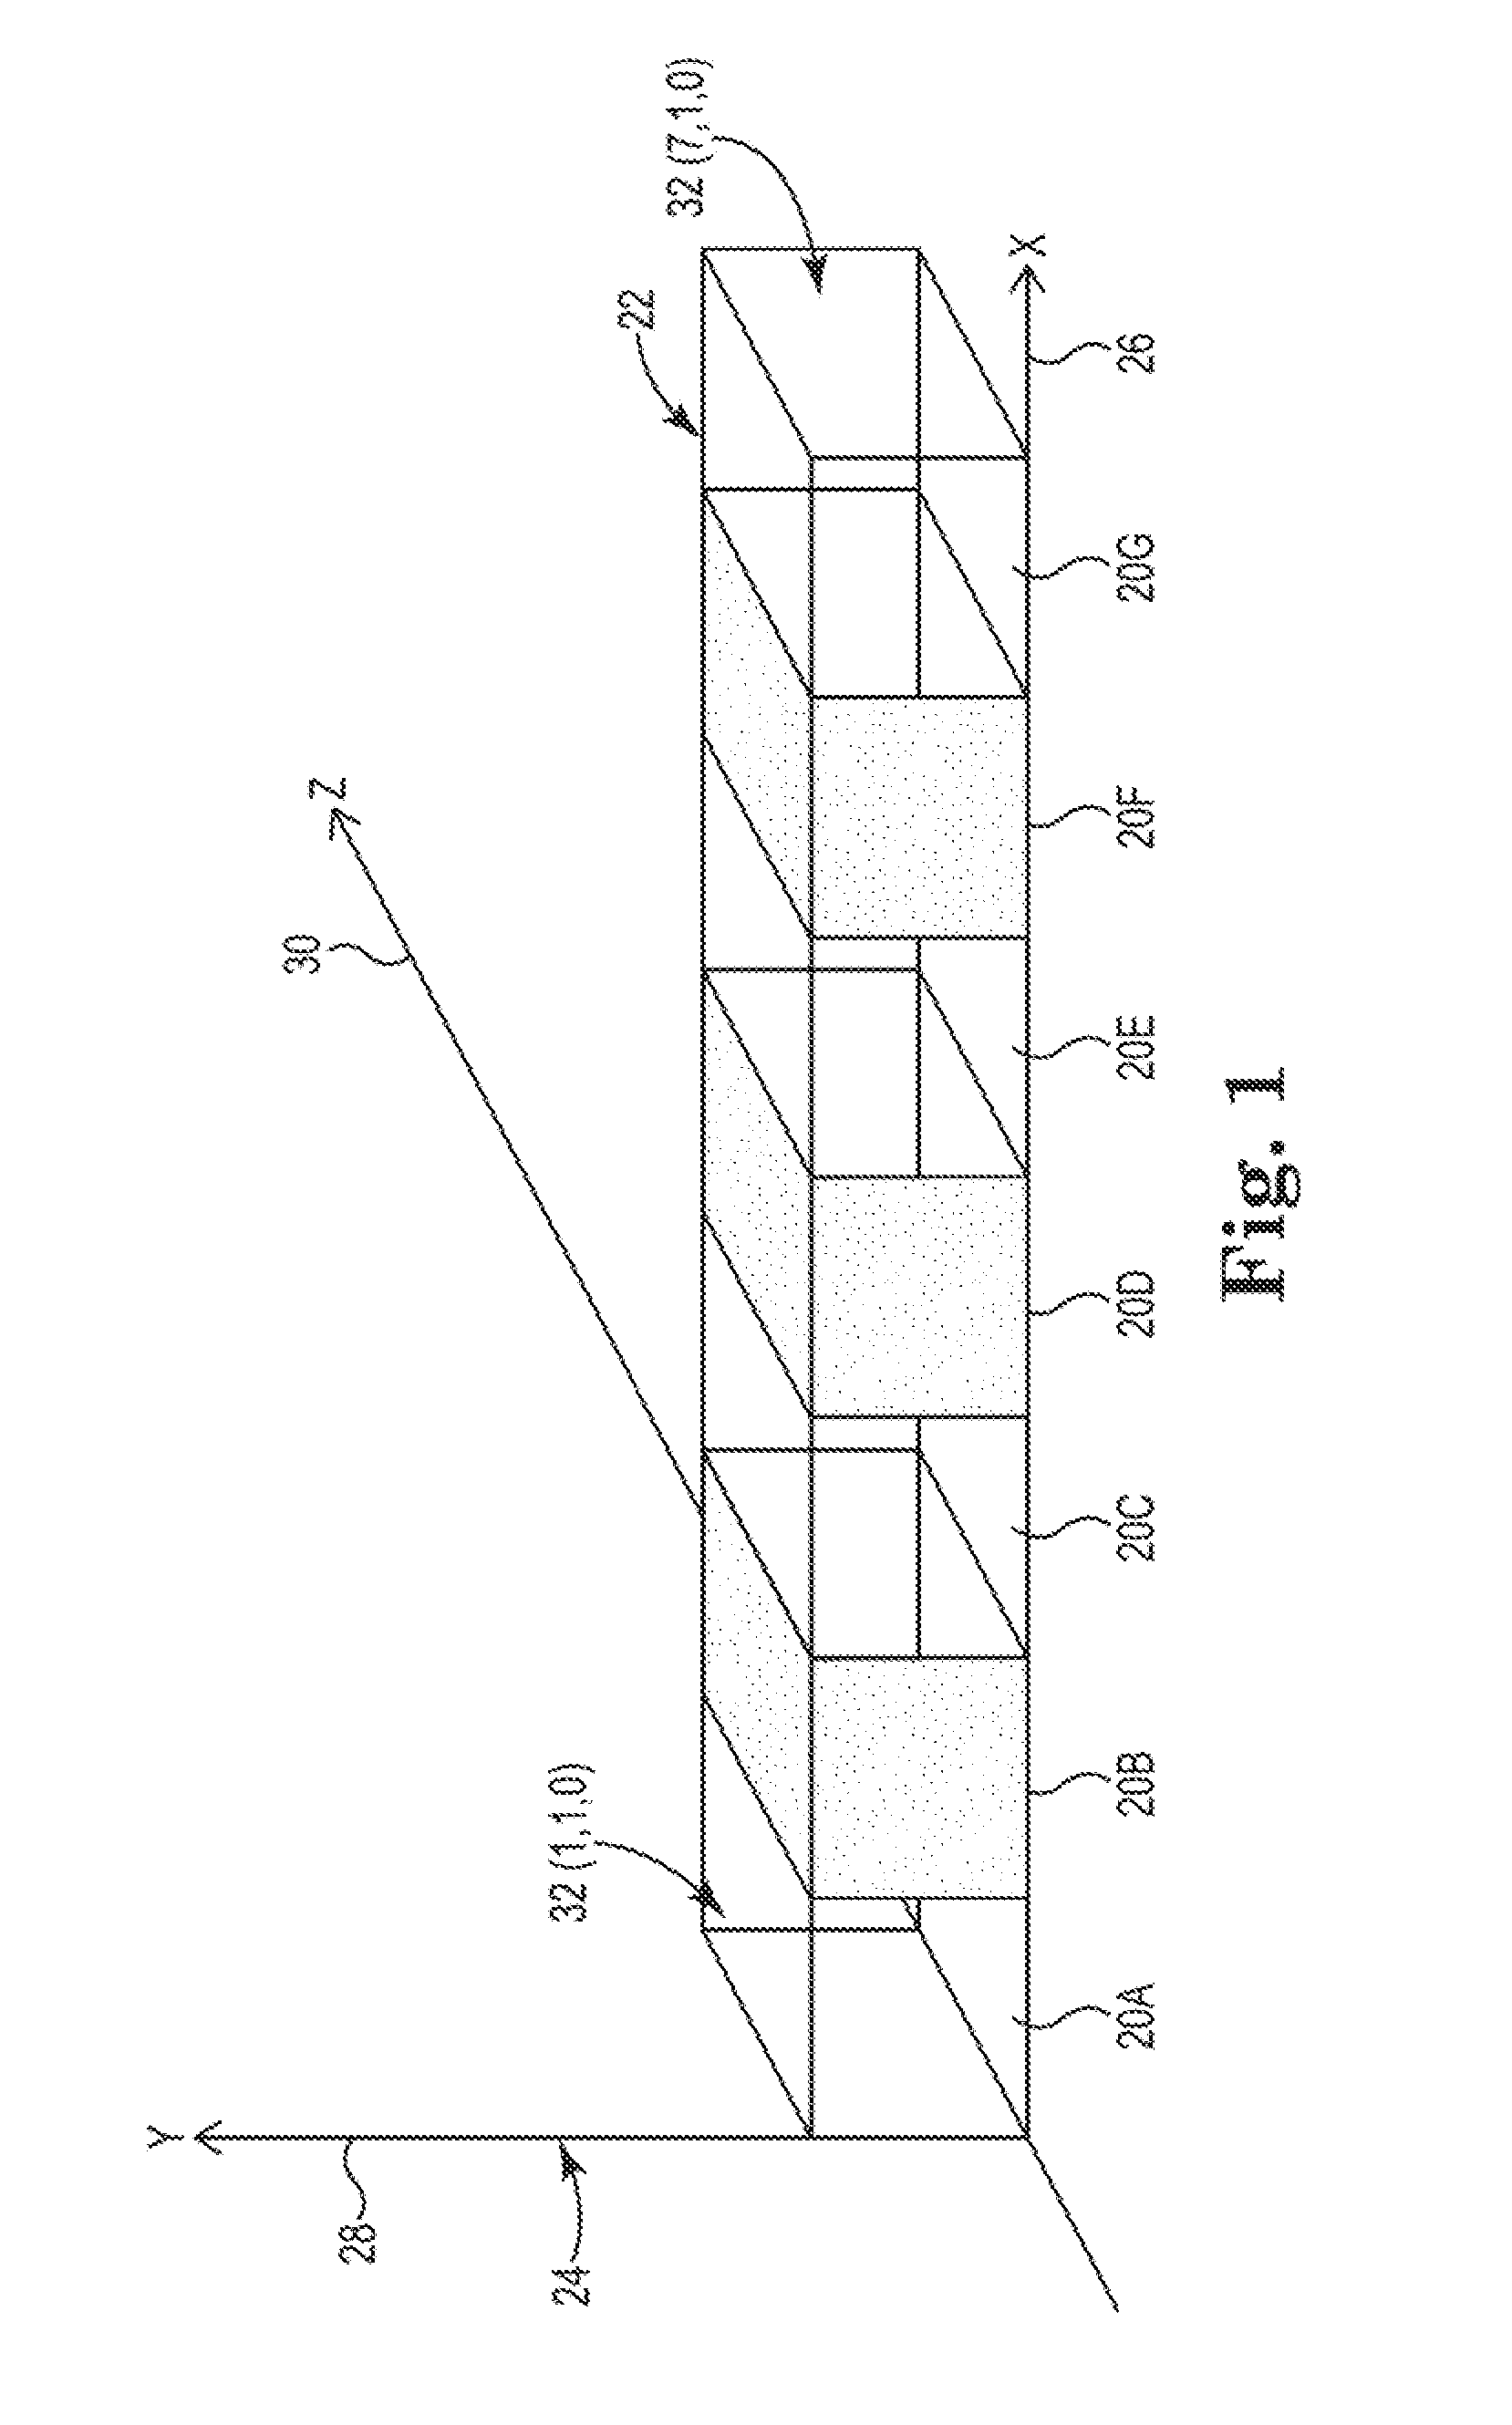 Matrix defined electrical circuit structure